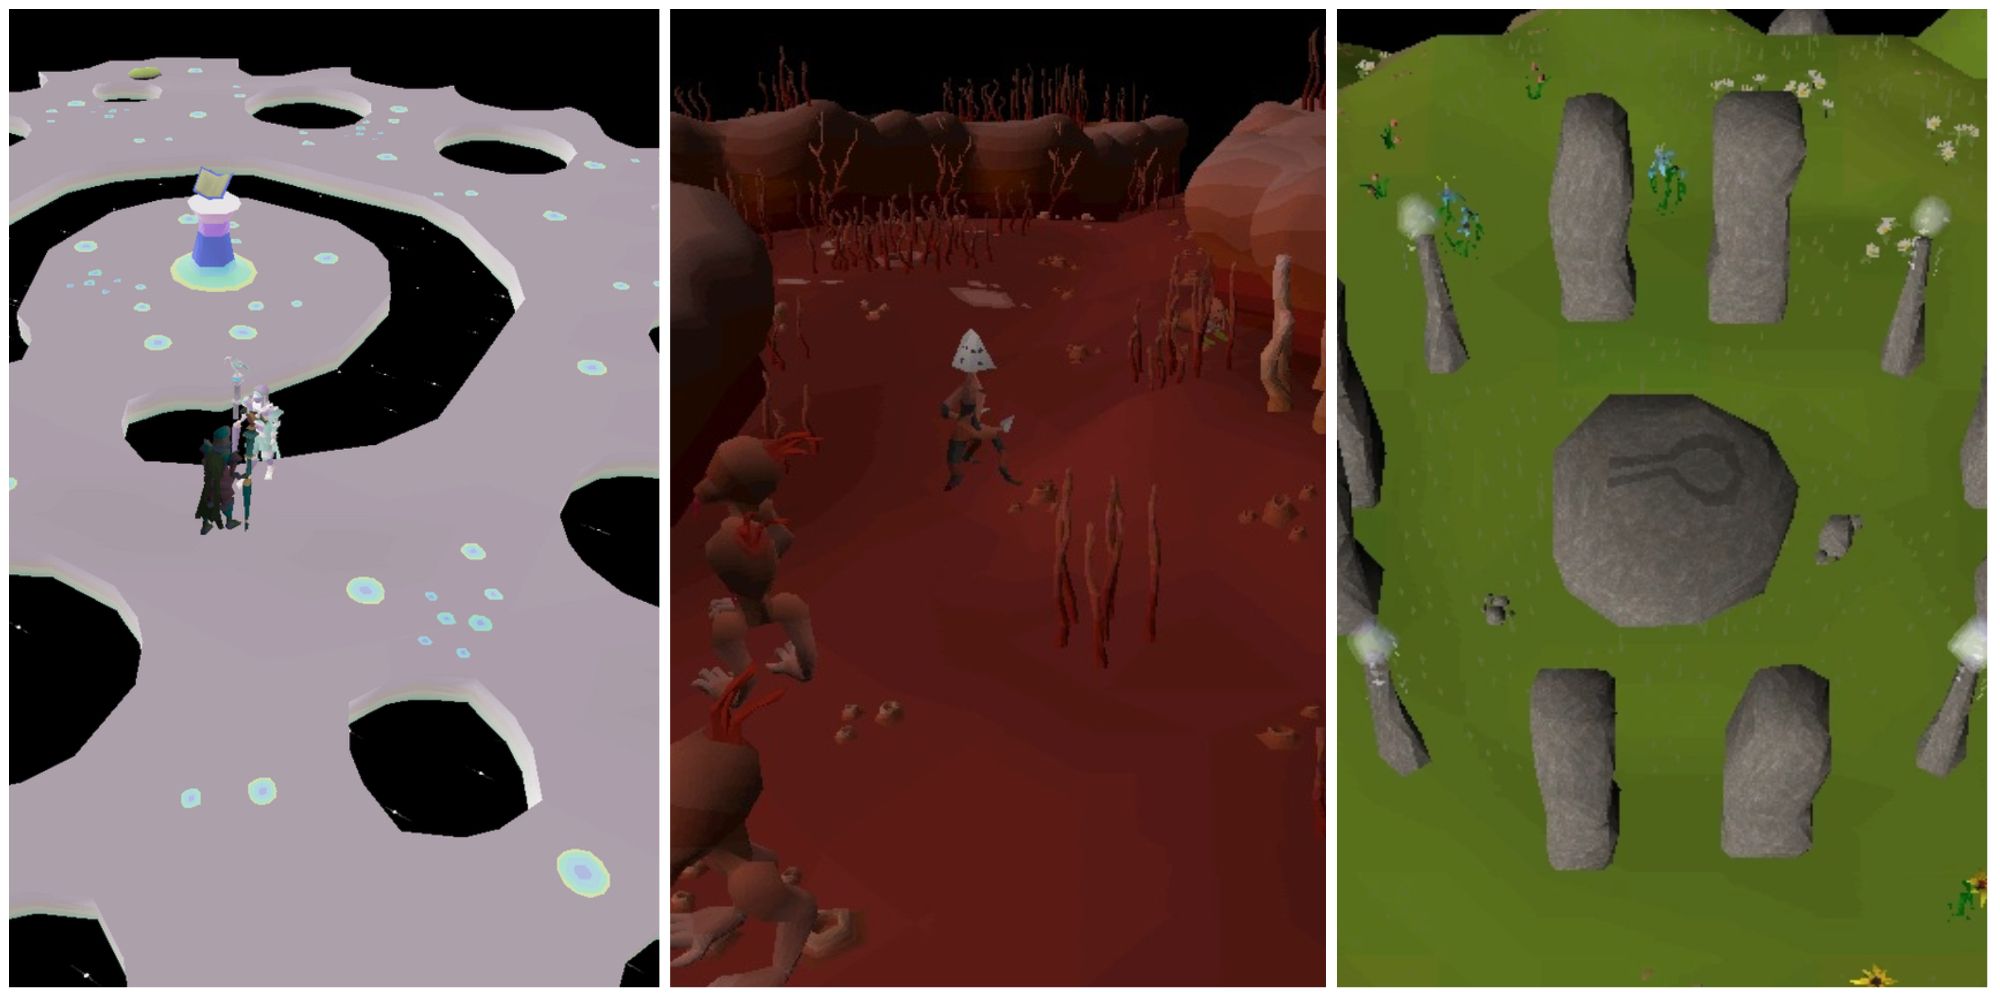 Old School RuneScape split feature image featuring screenshots of the Dream World, the Abyss, and the Nature Altar